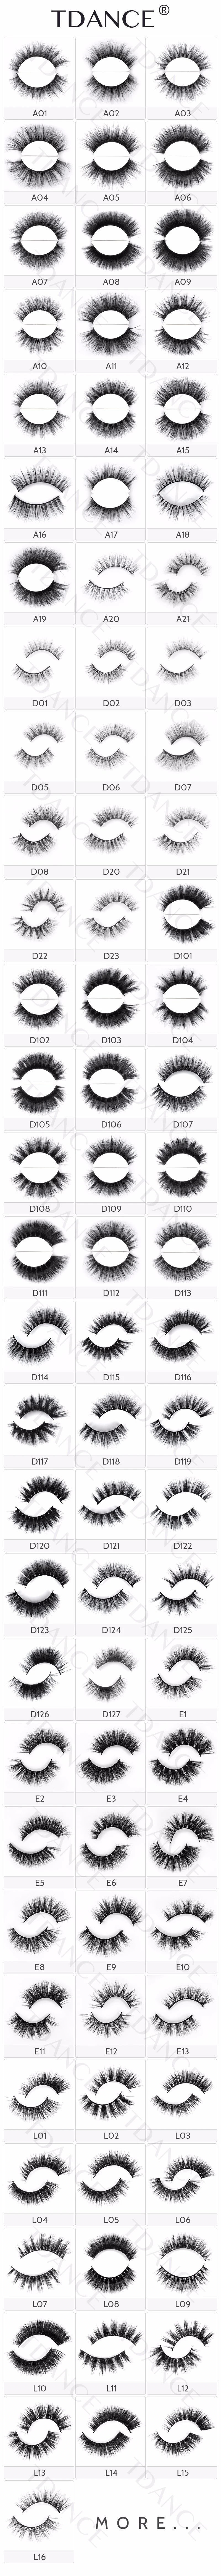 100% Real 3D Mink Eyelashes with Custom Packaging